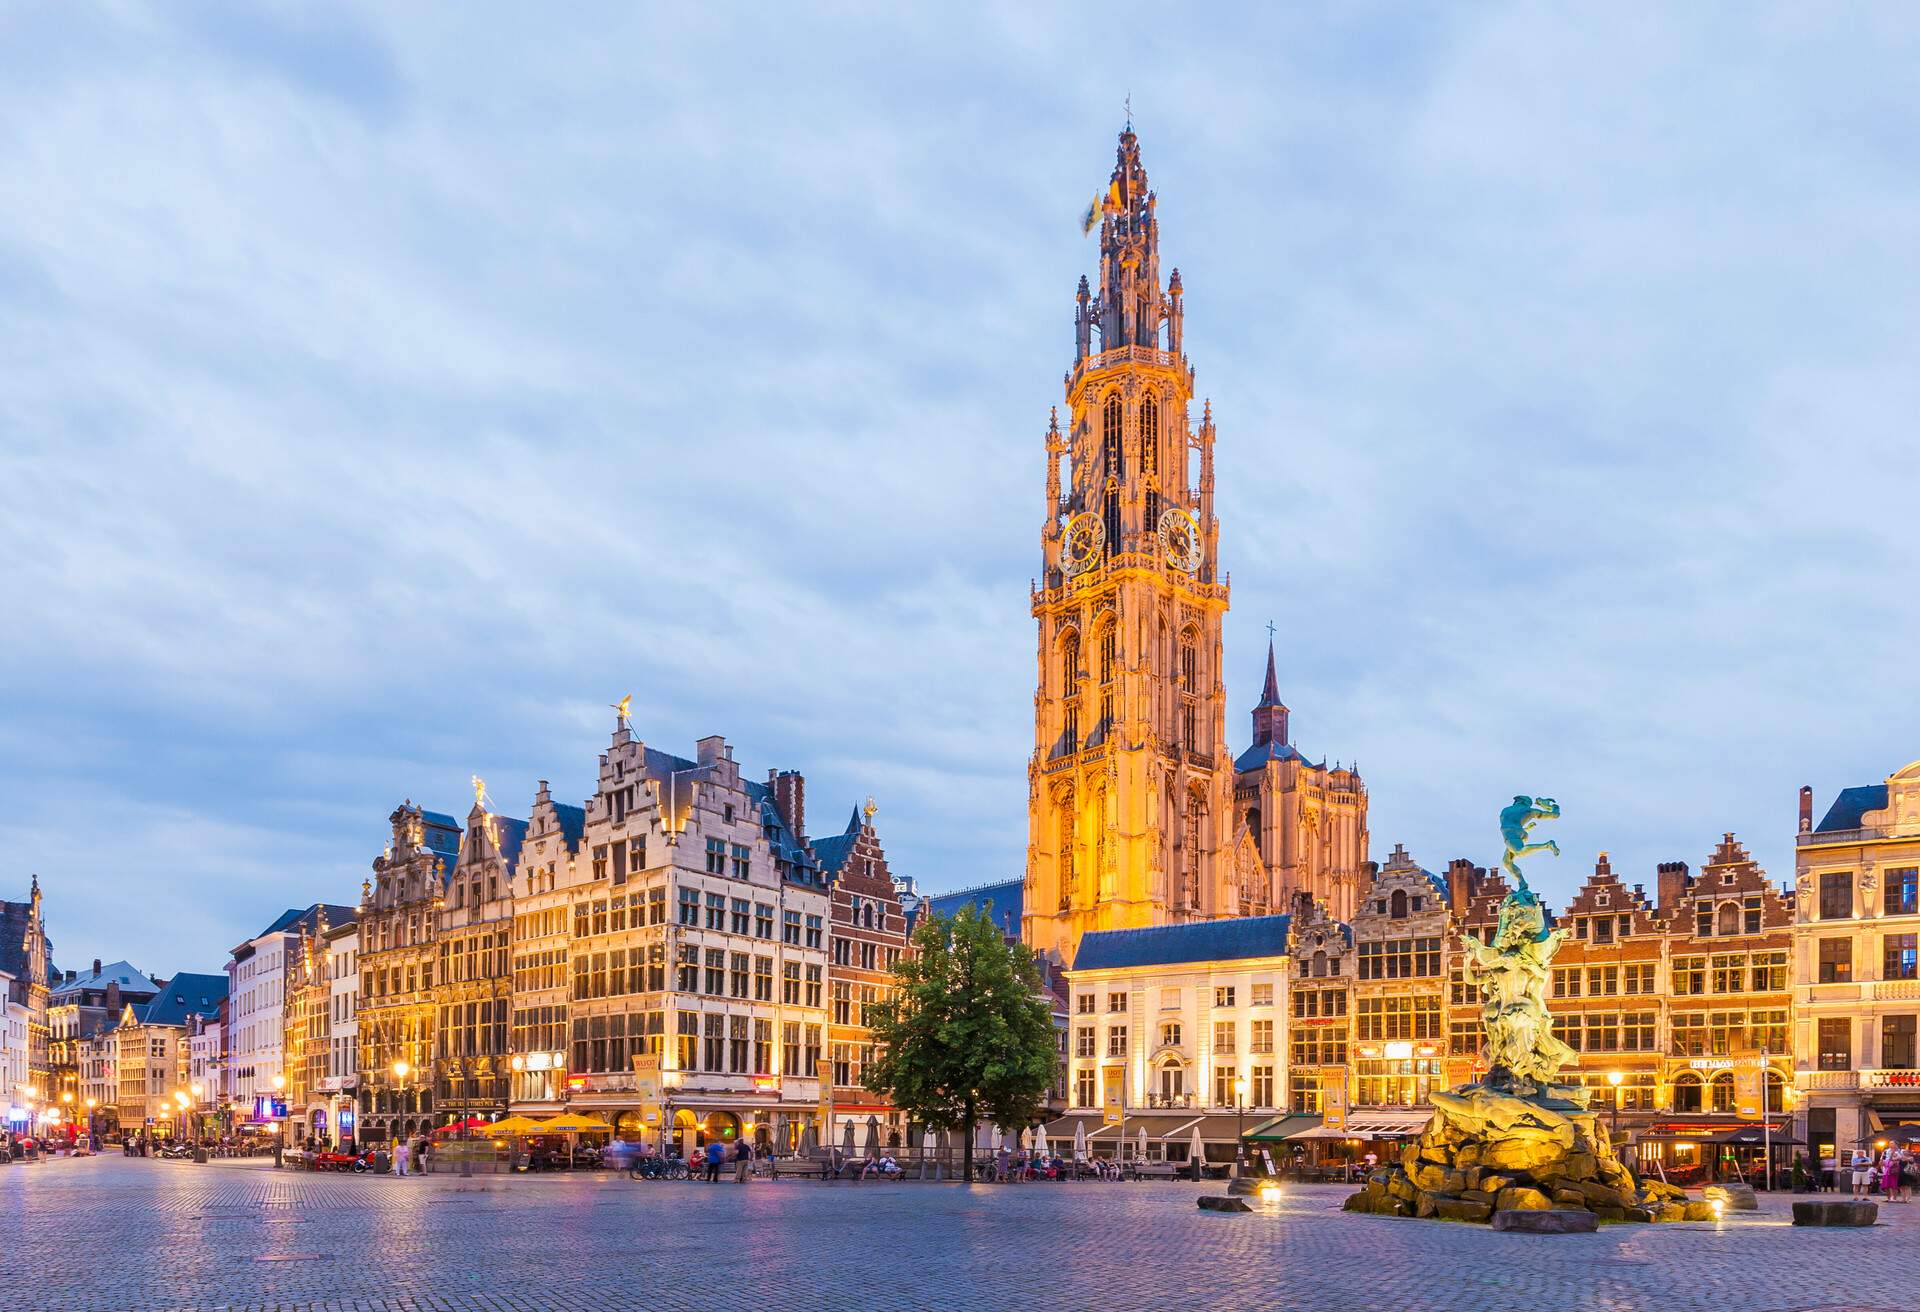 DEST_BELGIUM_ANTWERP_GREAT MARKET SQUARE_GUILDHALLS_CHURCH OF OUR LADY_GettyImages-590777653